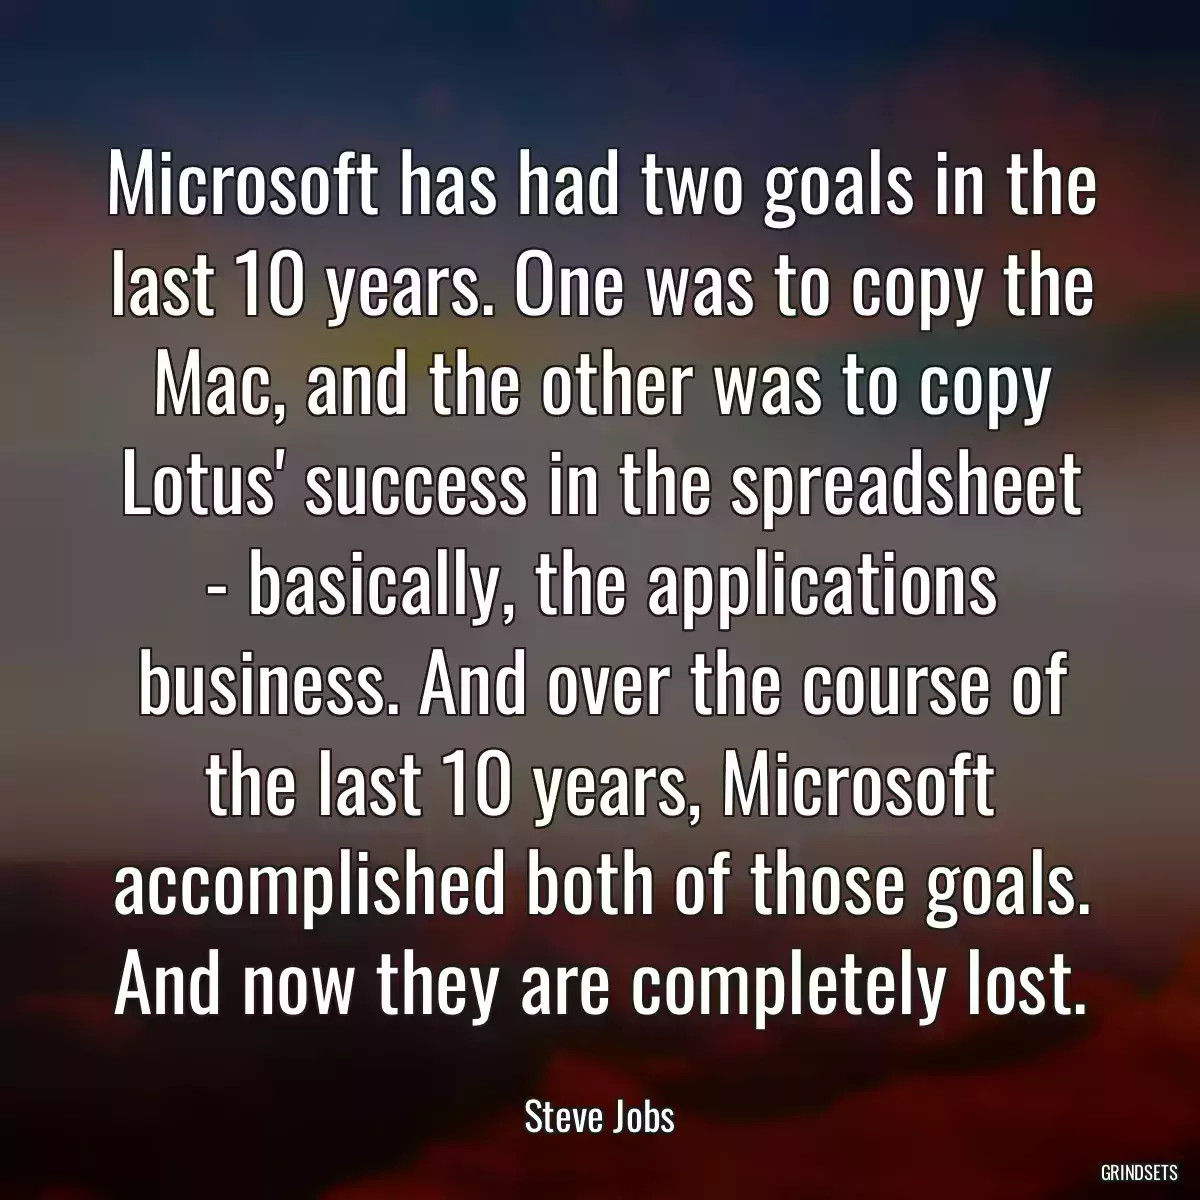 Microsoft has had two goals in the last 10 years. One was to copy the Mac, and the other was to copy Lotus\' success in the spreadsheet - basically, the applications business. And over the course of the last 10 years, Microsoft accomplished both of those goals. And now they are completely lost.